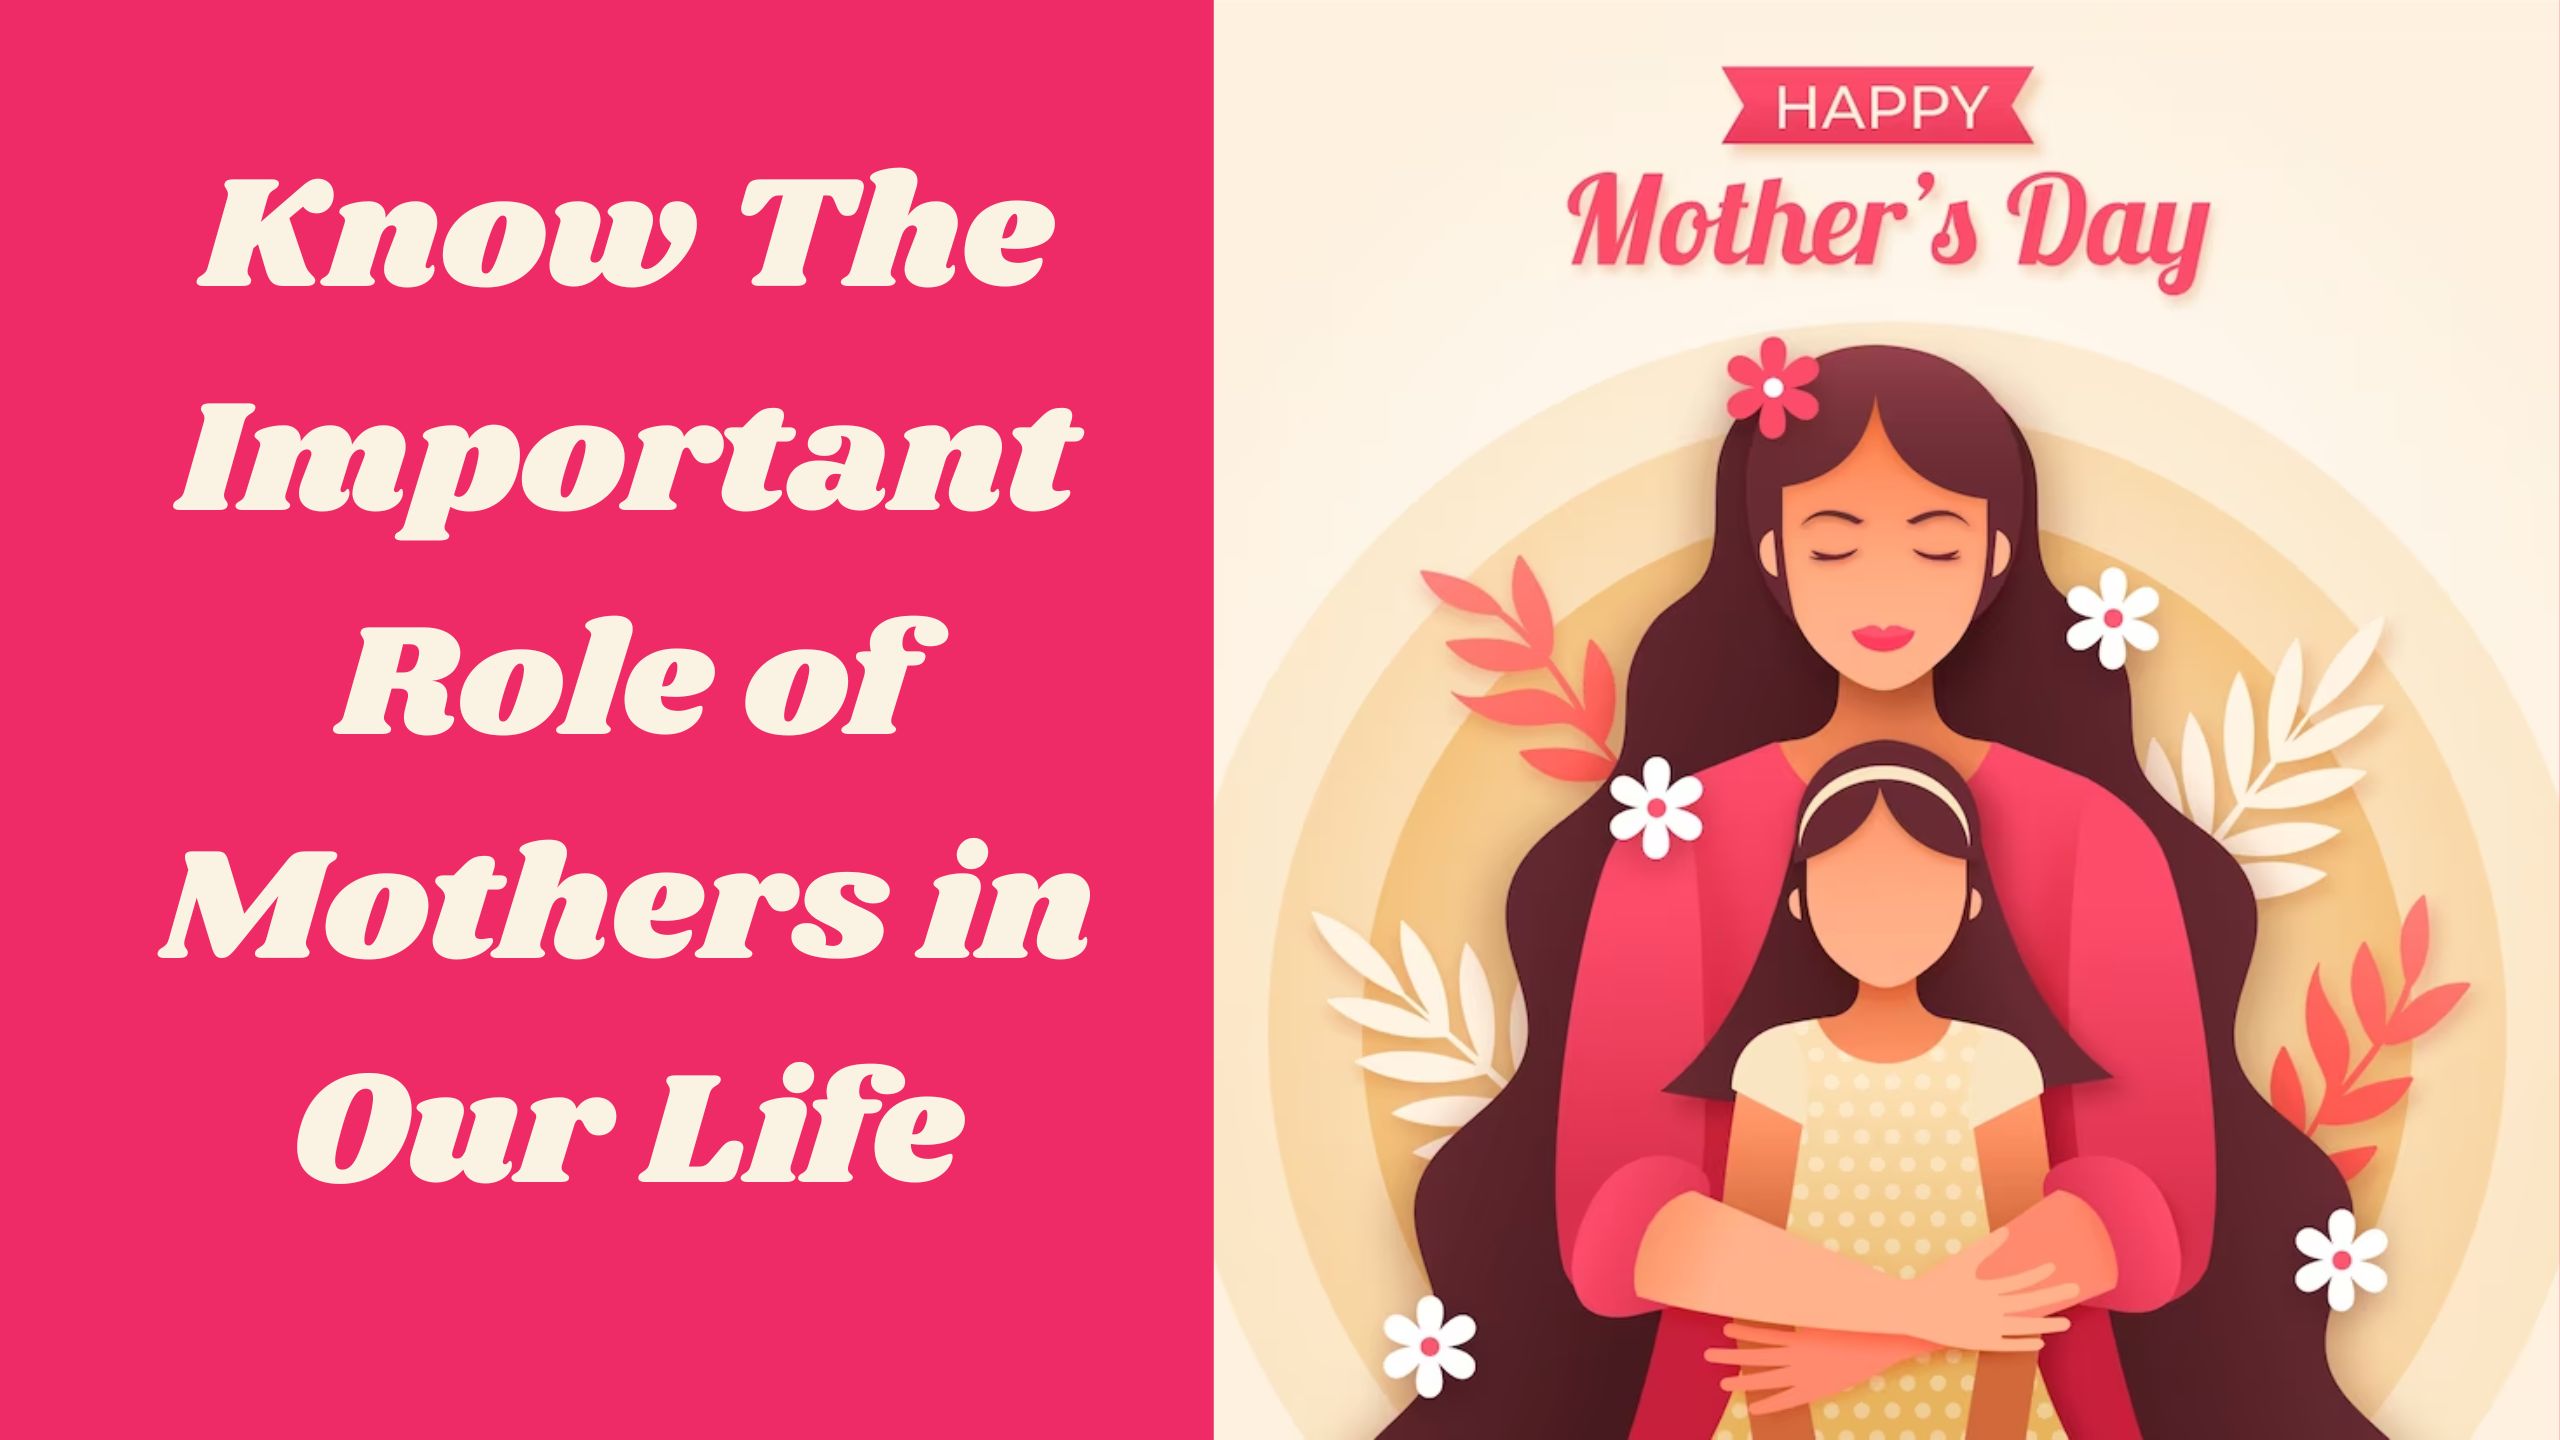 Role of Mothers in Our Life